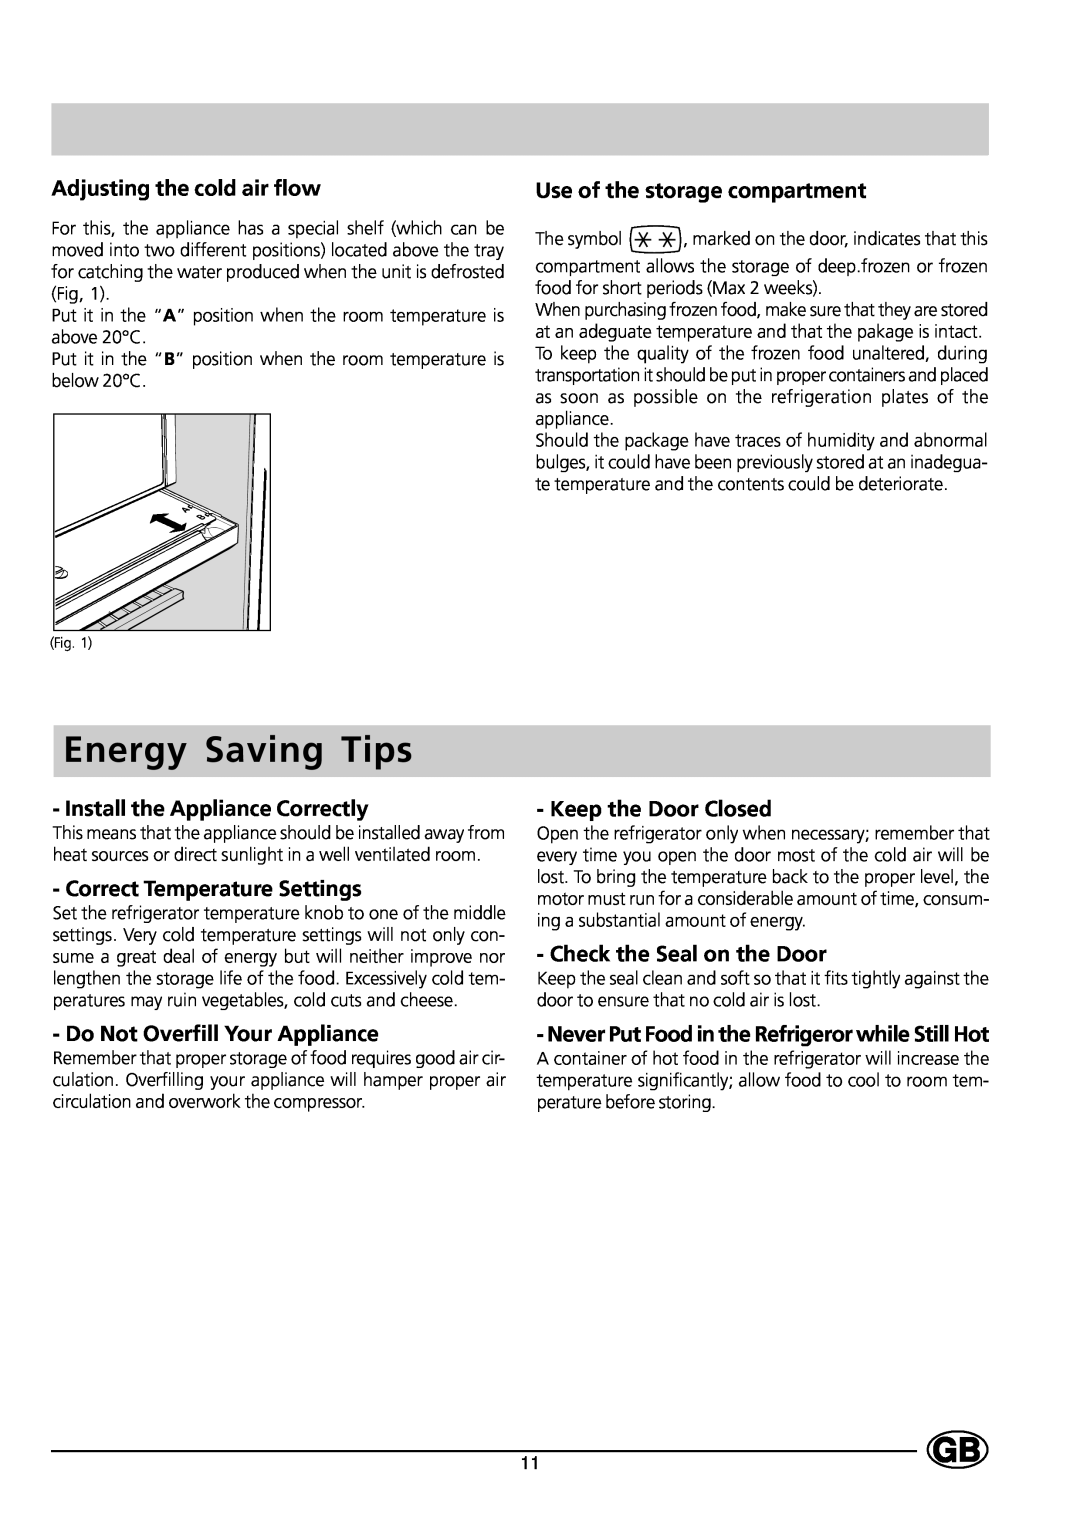 Indesit RG1142 manual Energy Saving Tips, Adjusting the cold air flow, Use of the storage compartment, Keep the Door Closed 